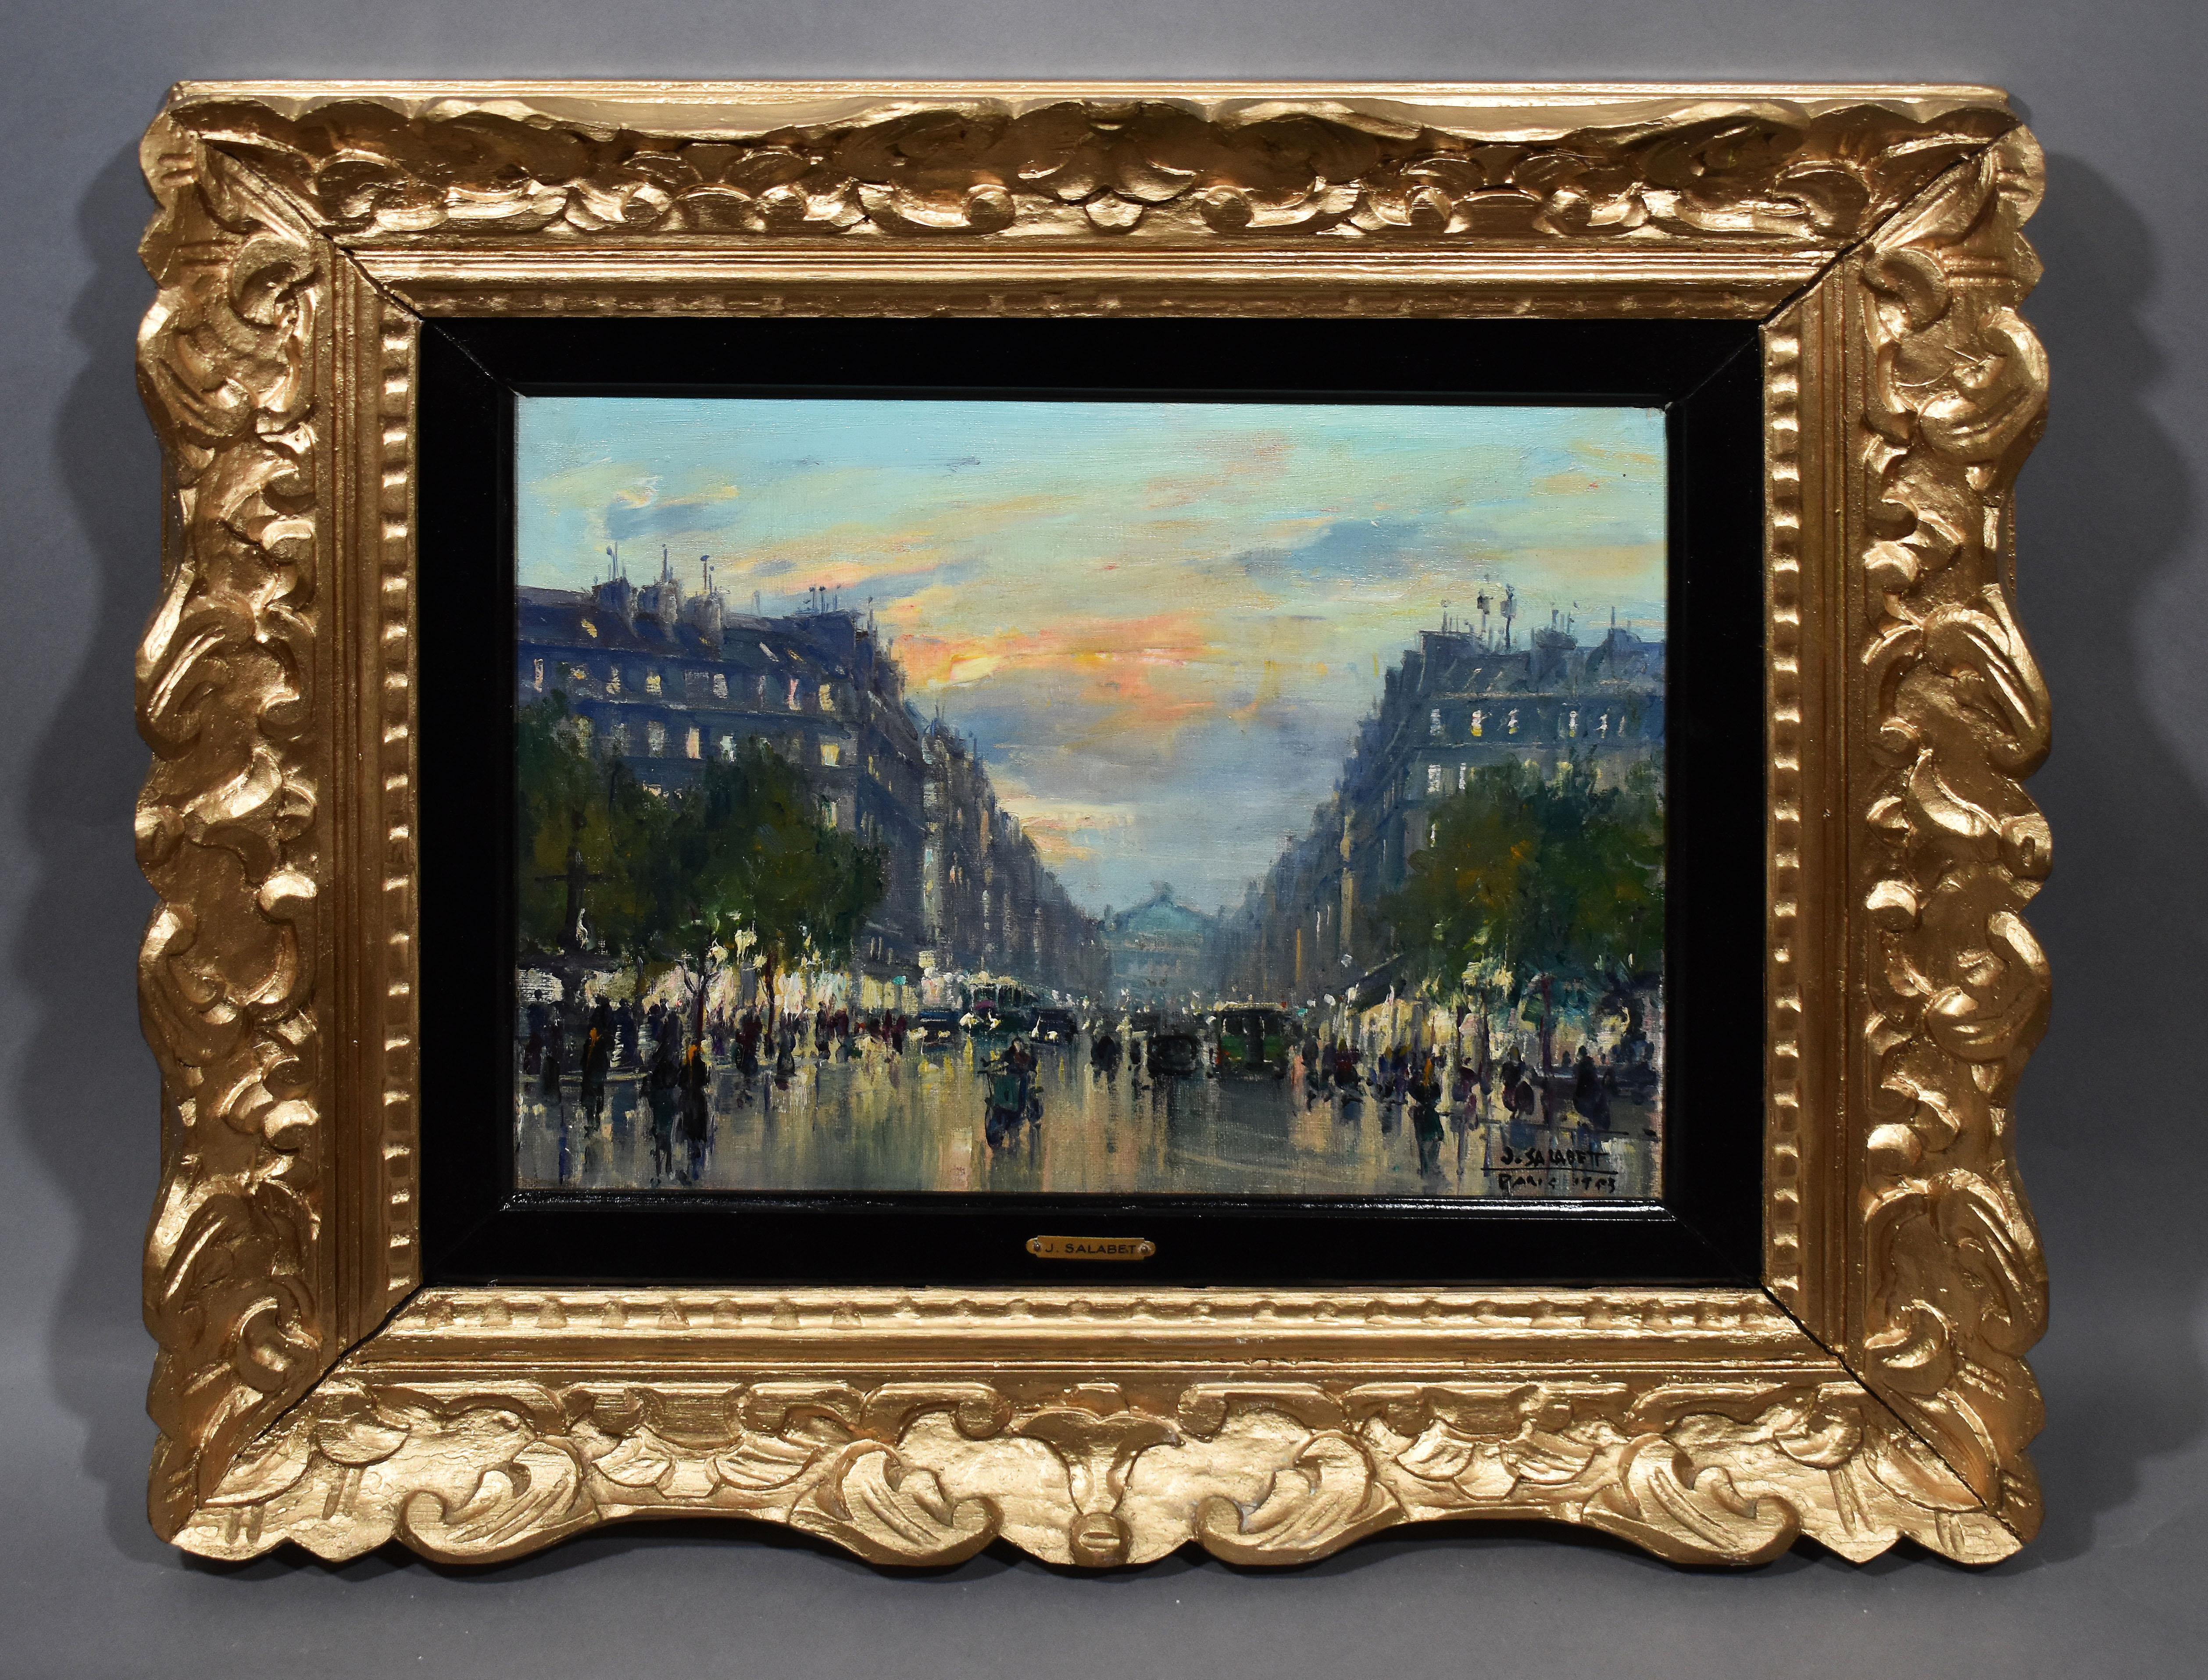 Impressionist Paris cityscape painting by Jean Salabet  (born 1900).   Oil on canvas, circa 1930.  Signed.  Displayed in a giltwood impressionist frame.  Image size, 14